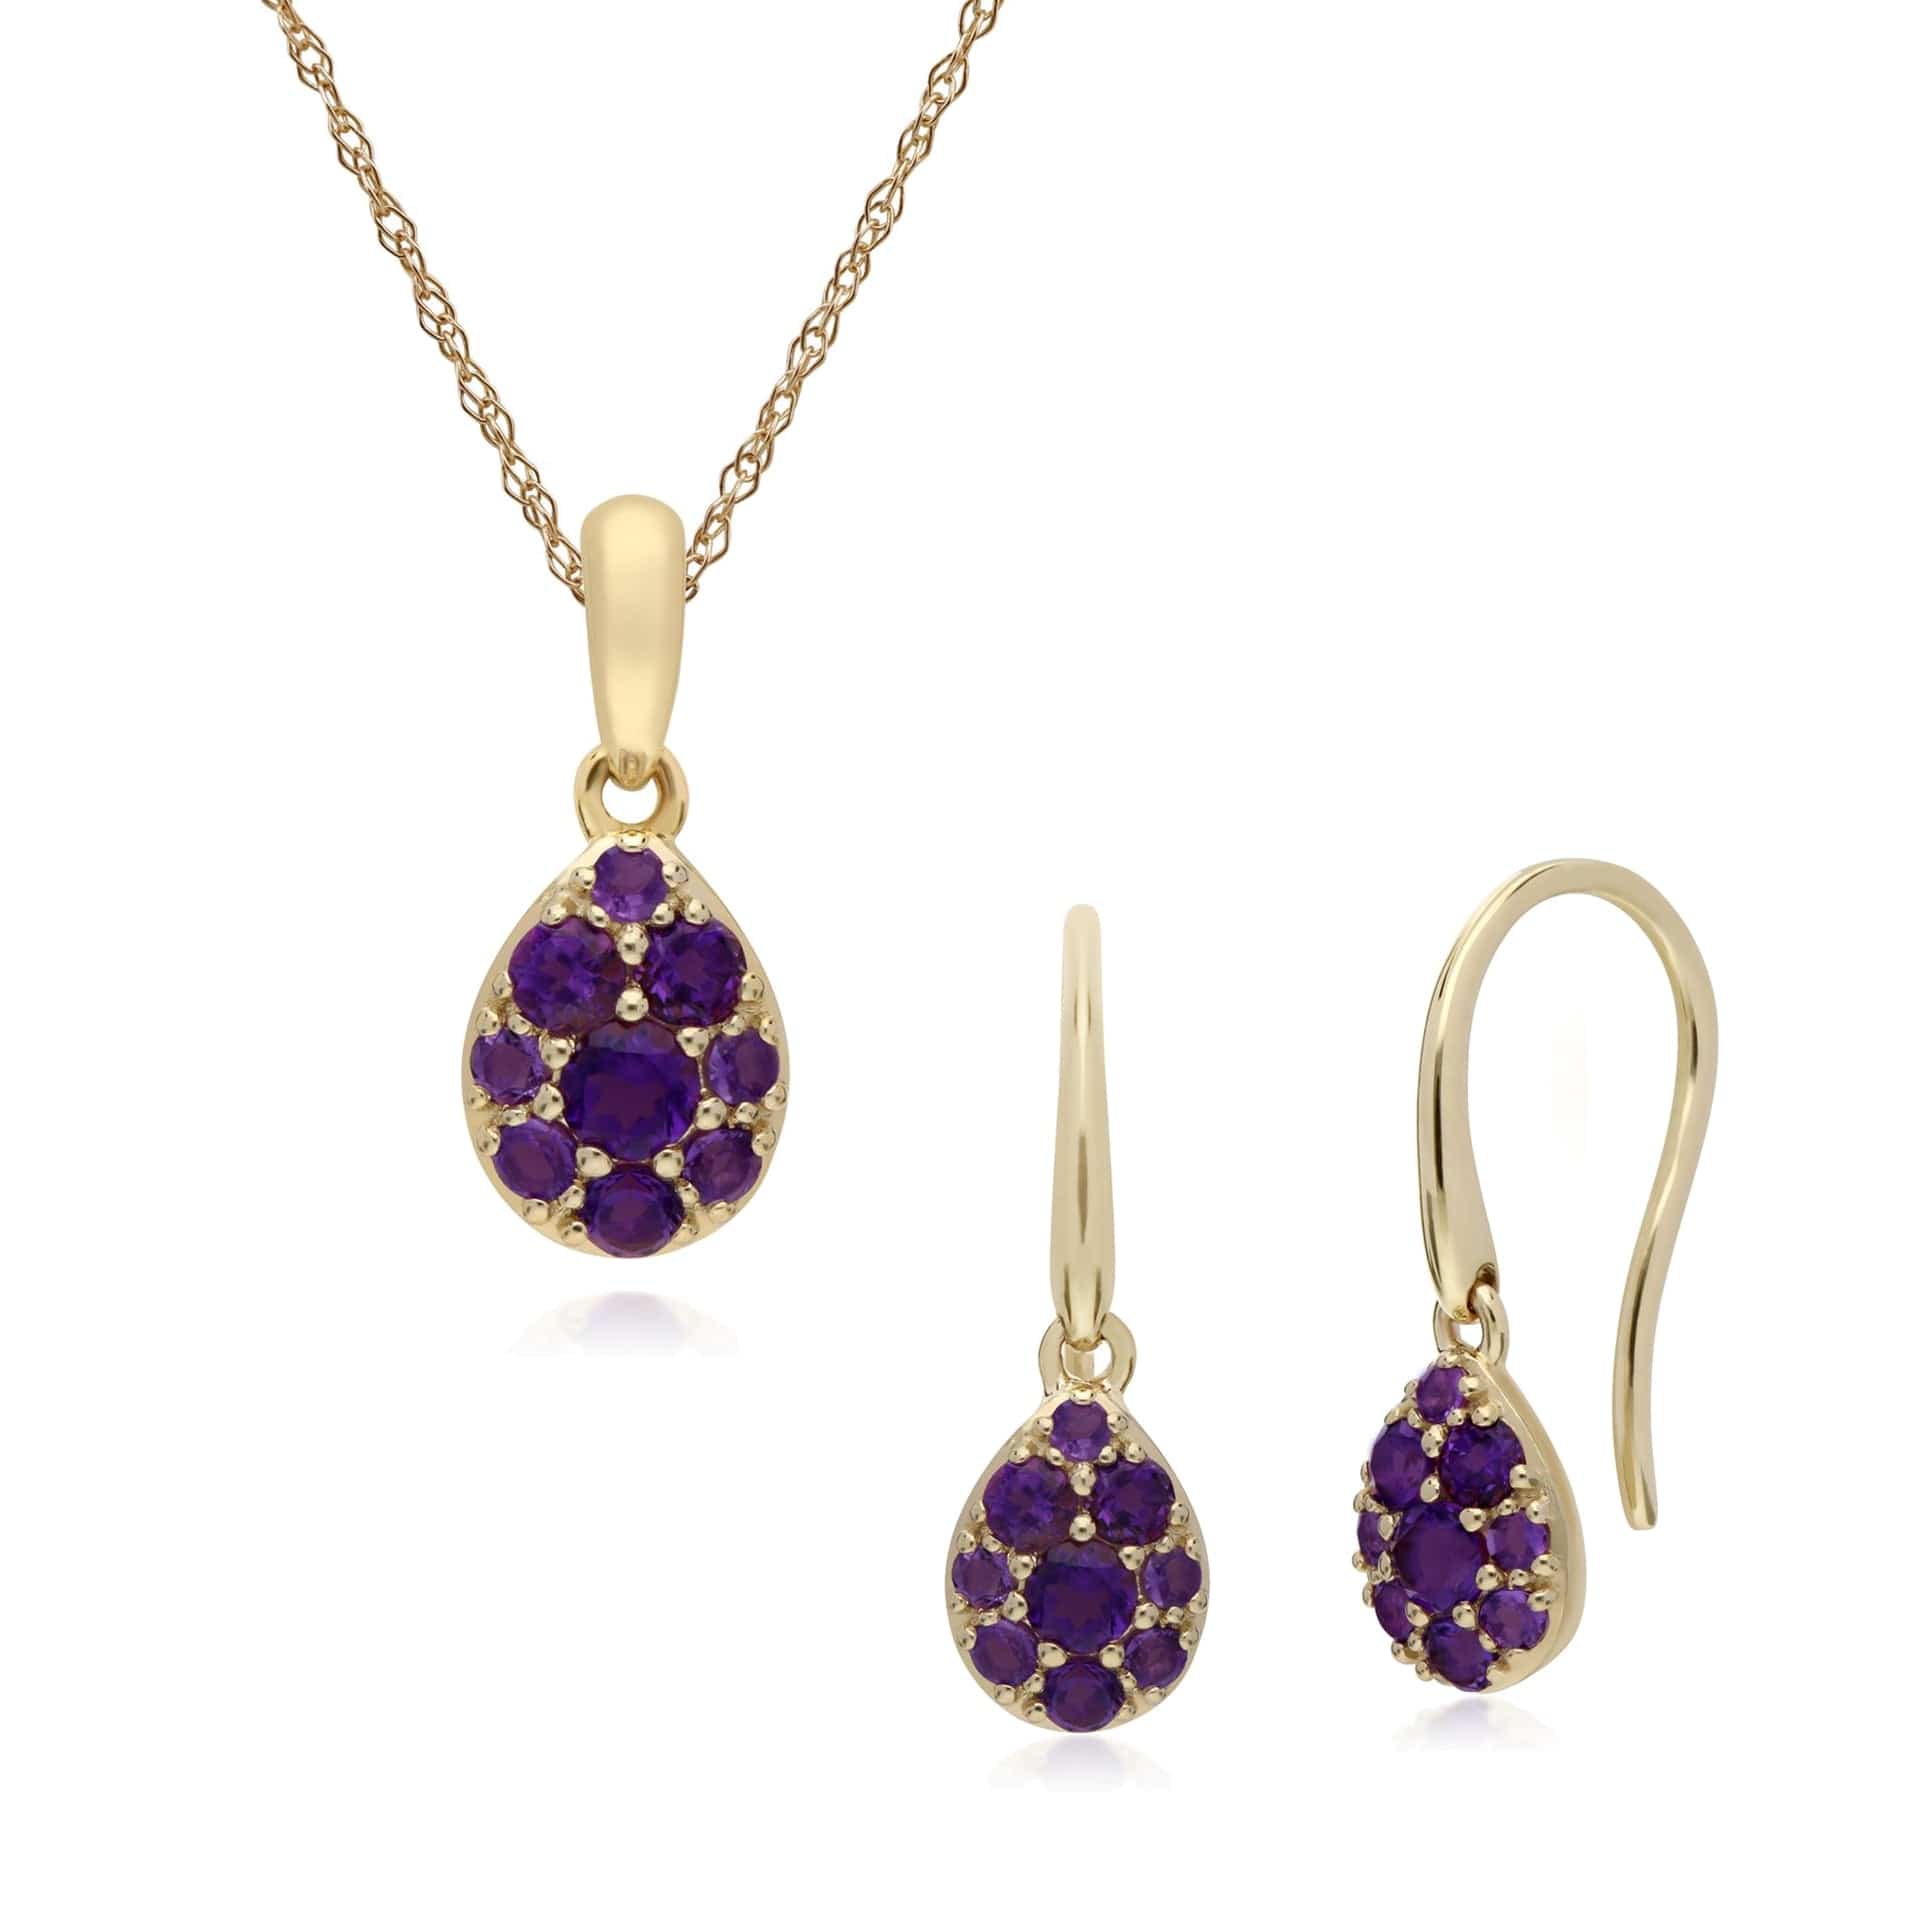 135E1574019-135P1909019 Classic Round Amethyst Pear Cluster Drop Earrings & Pendant Set in 9ct Yellow Gold 1